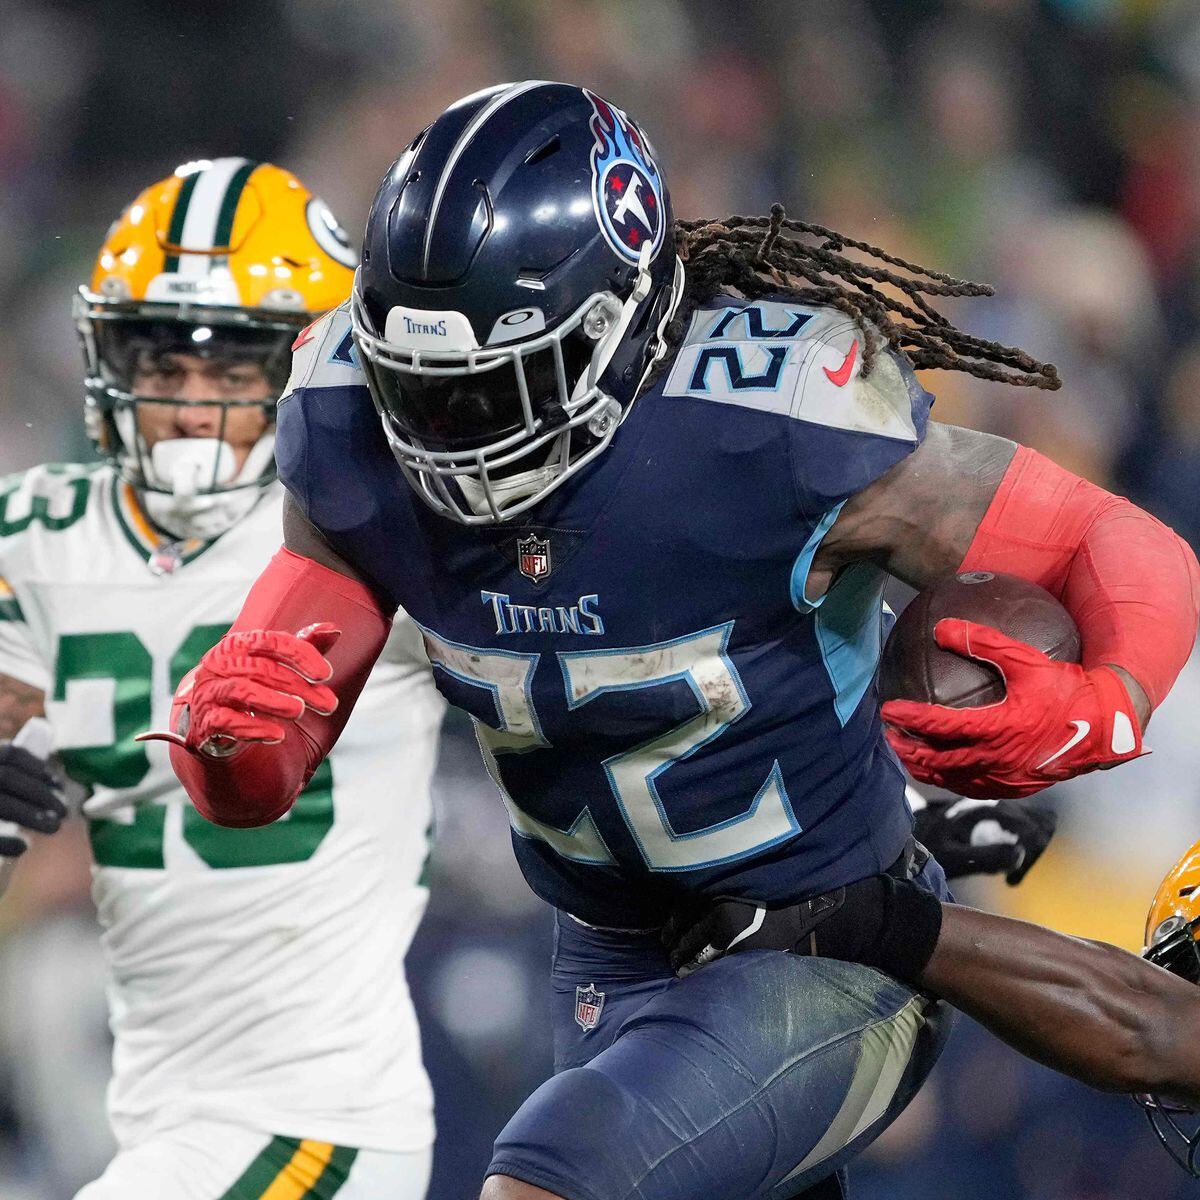 Derrick Henry's 29-yard rushing touchdown leads Titans to victory